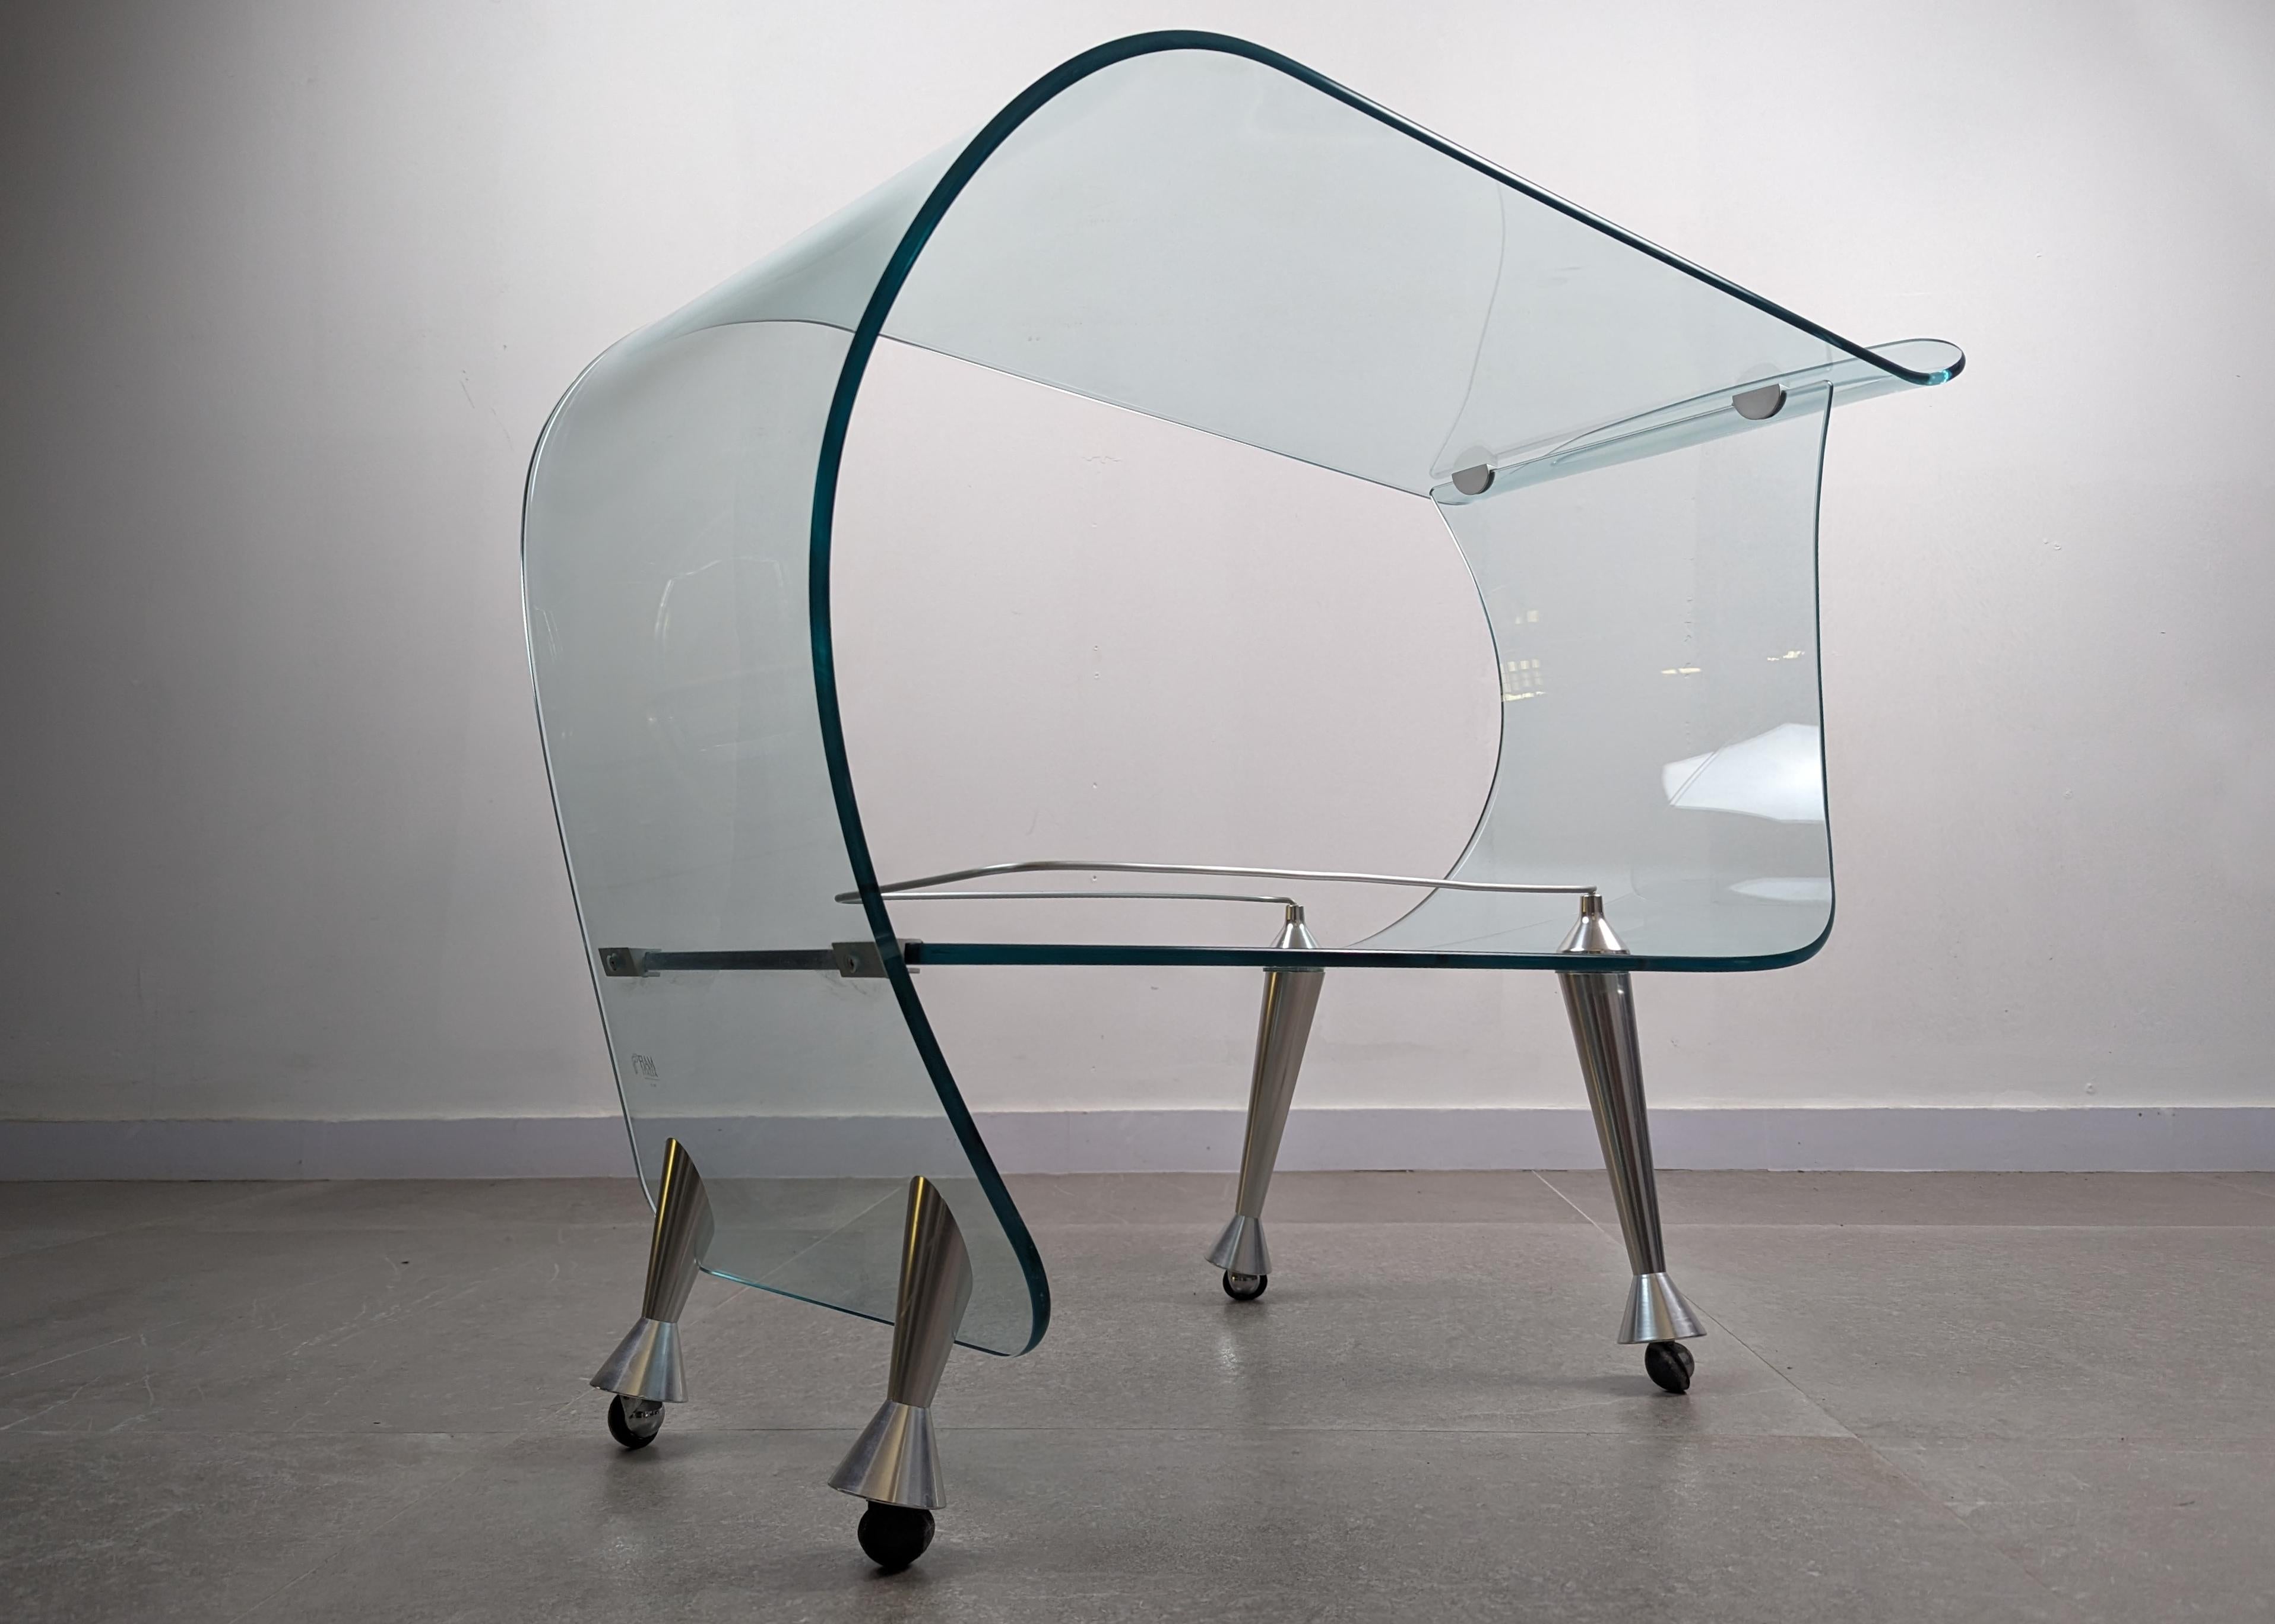 Spectacular bar service cart designed by the renowned Italian designer Massimo Iosa-Ghini exclusively for Fiam. This fantastic piece combines the elegance of curved glass with the stability of stainless steel. This vintage bar cart is a highly